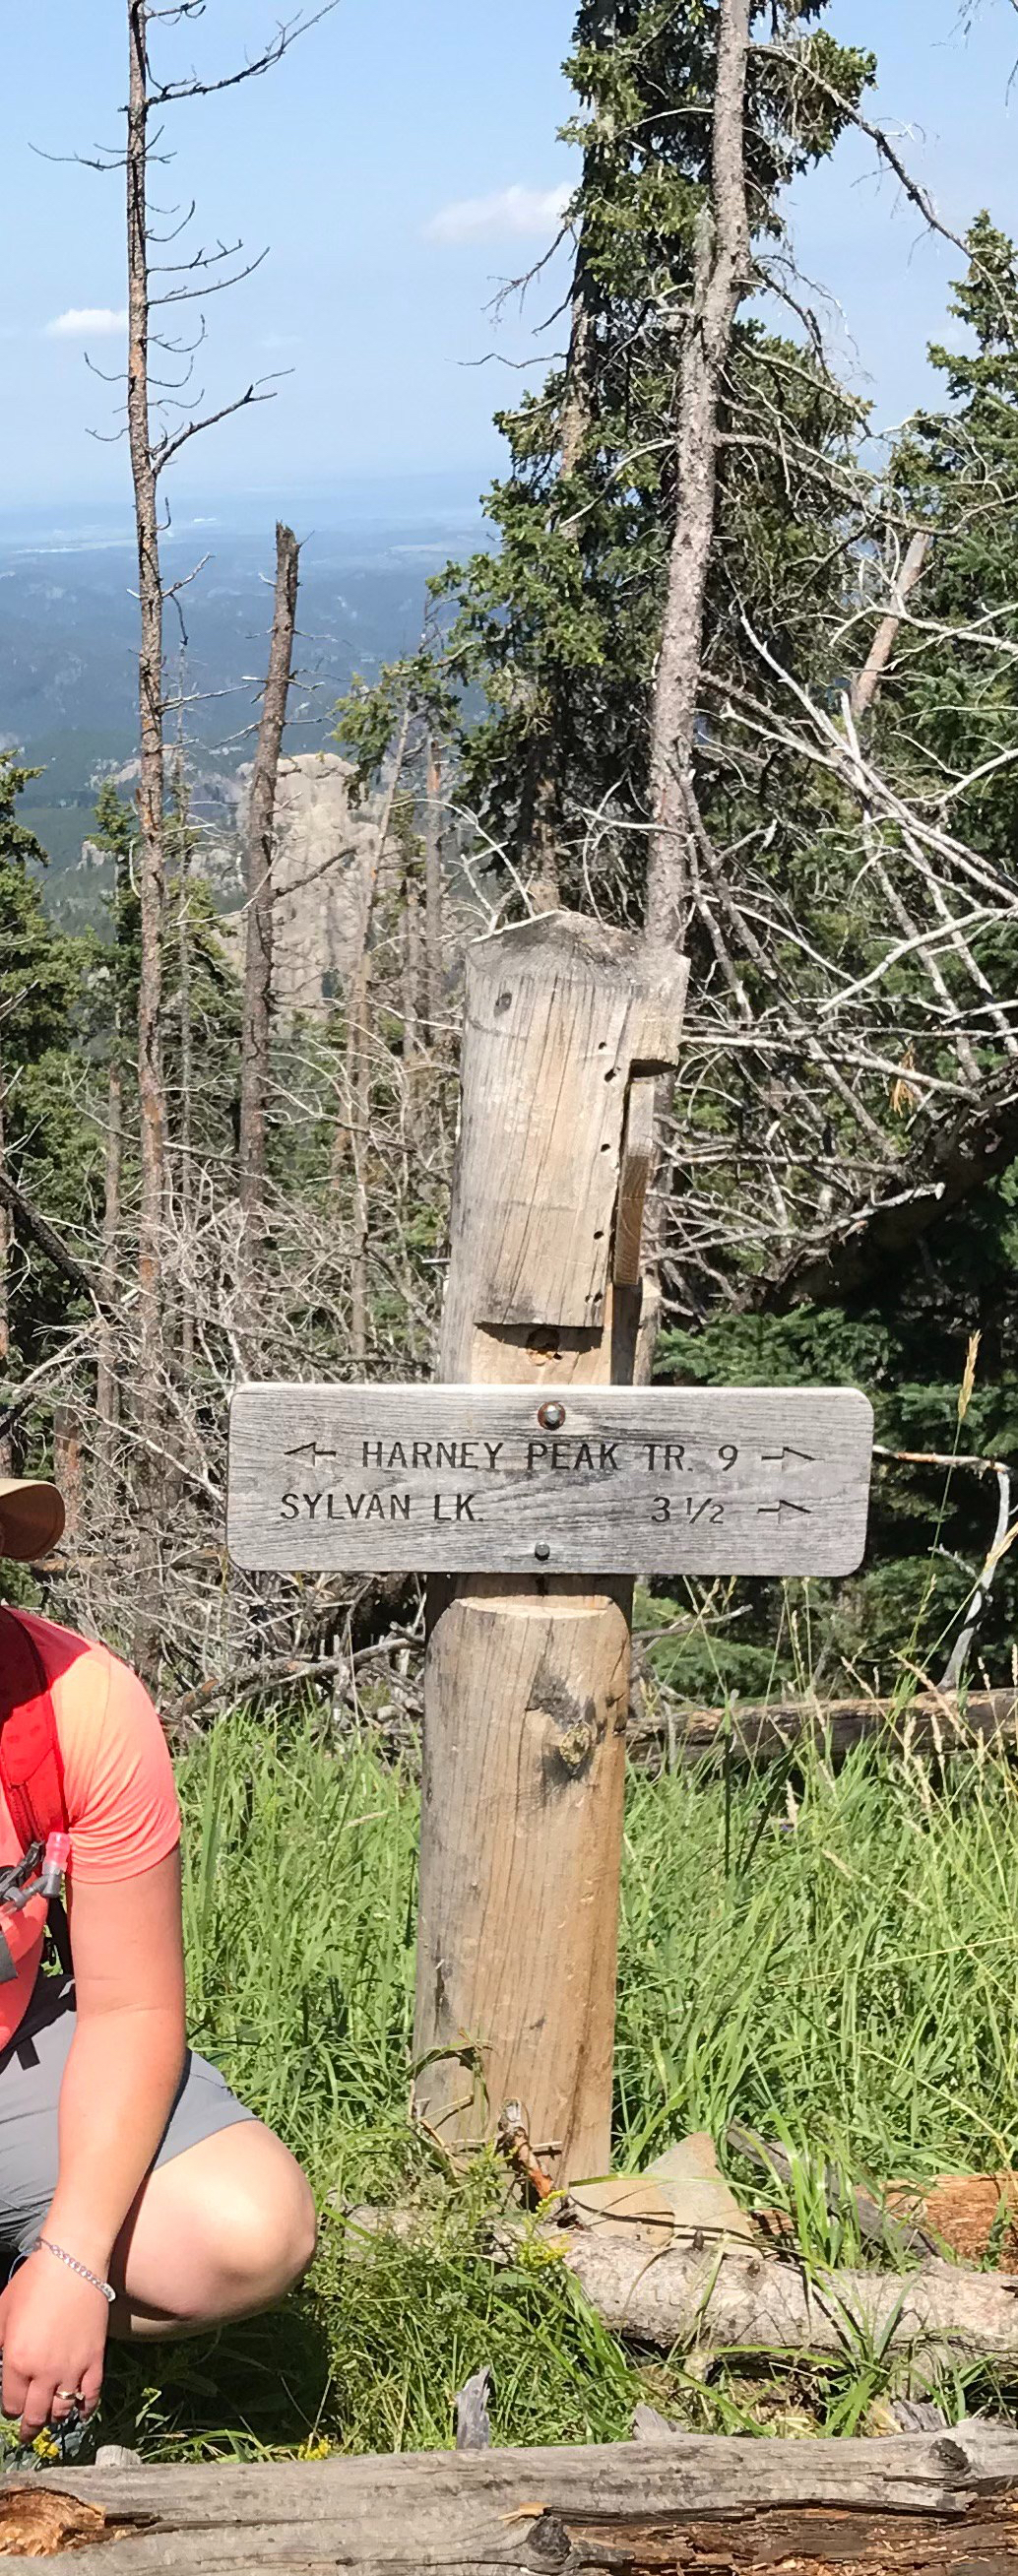 A wooden sign on a wooden post in the woods that reads, "Harney Peak, Tr. 9" and "Sylvan Lake 3.5", both with arrows pointing to the correct direction